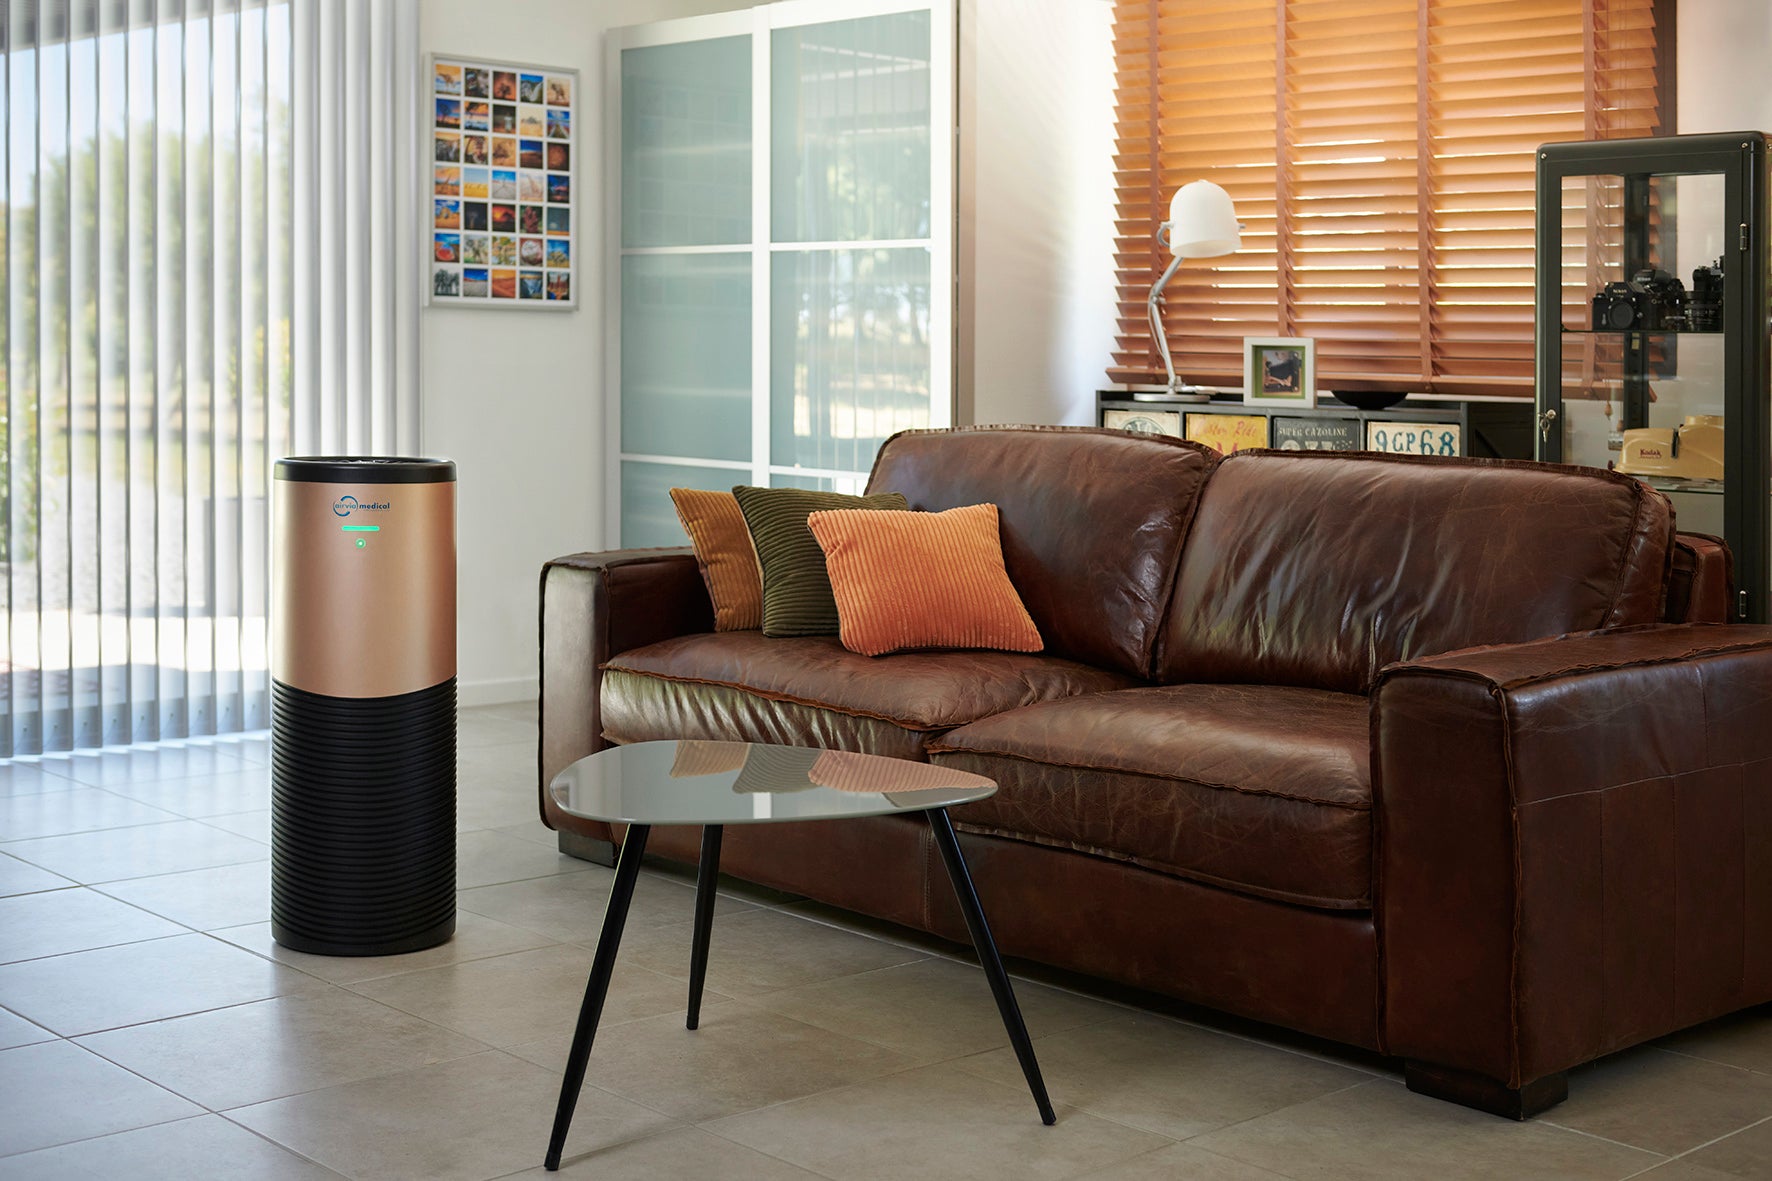 AIRVIA PRO 150 air purifier in a living room